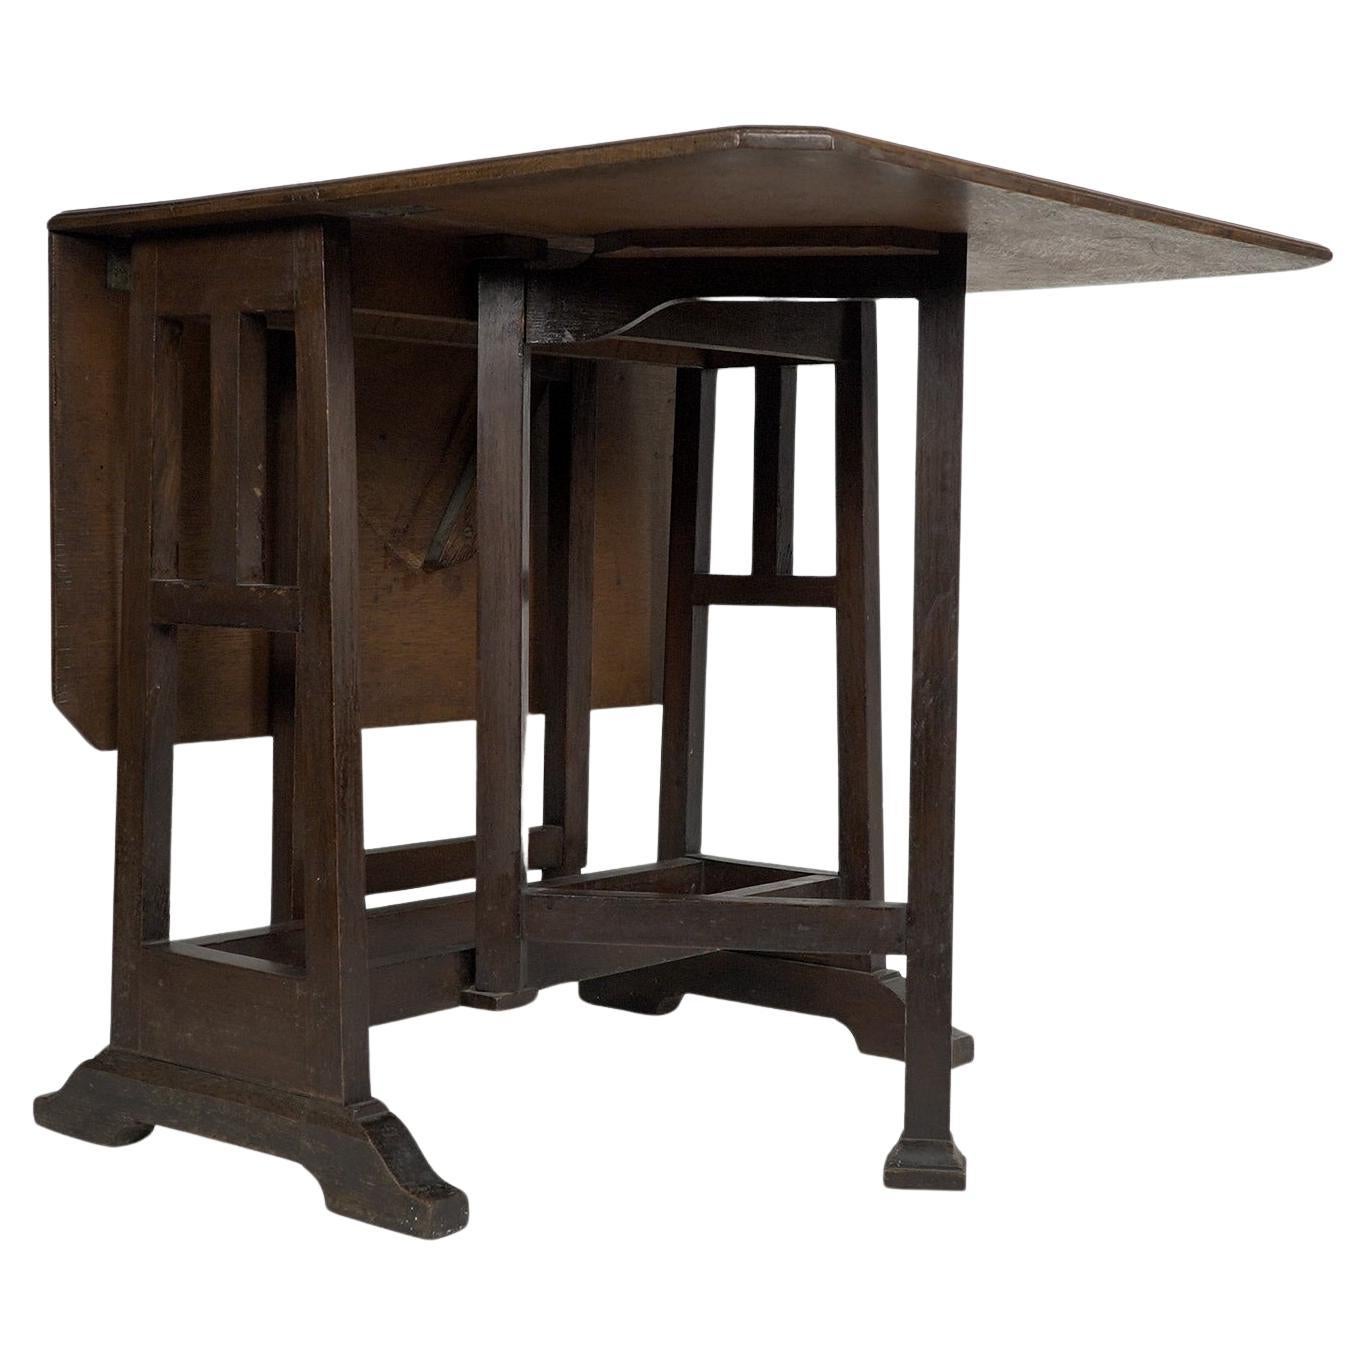 Liberty and Co (attributed). A good quality Arts & Crafts oak drop-leaf table